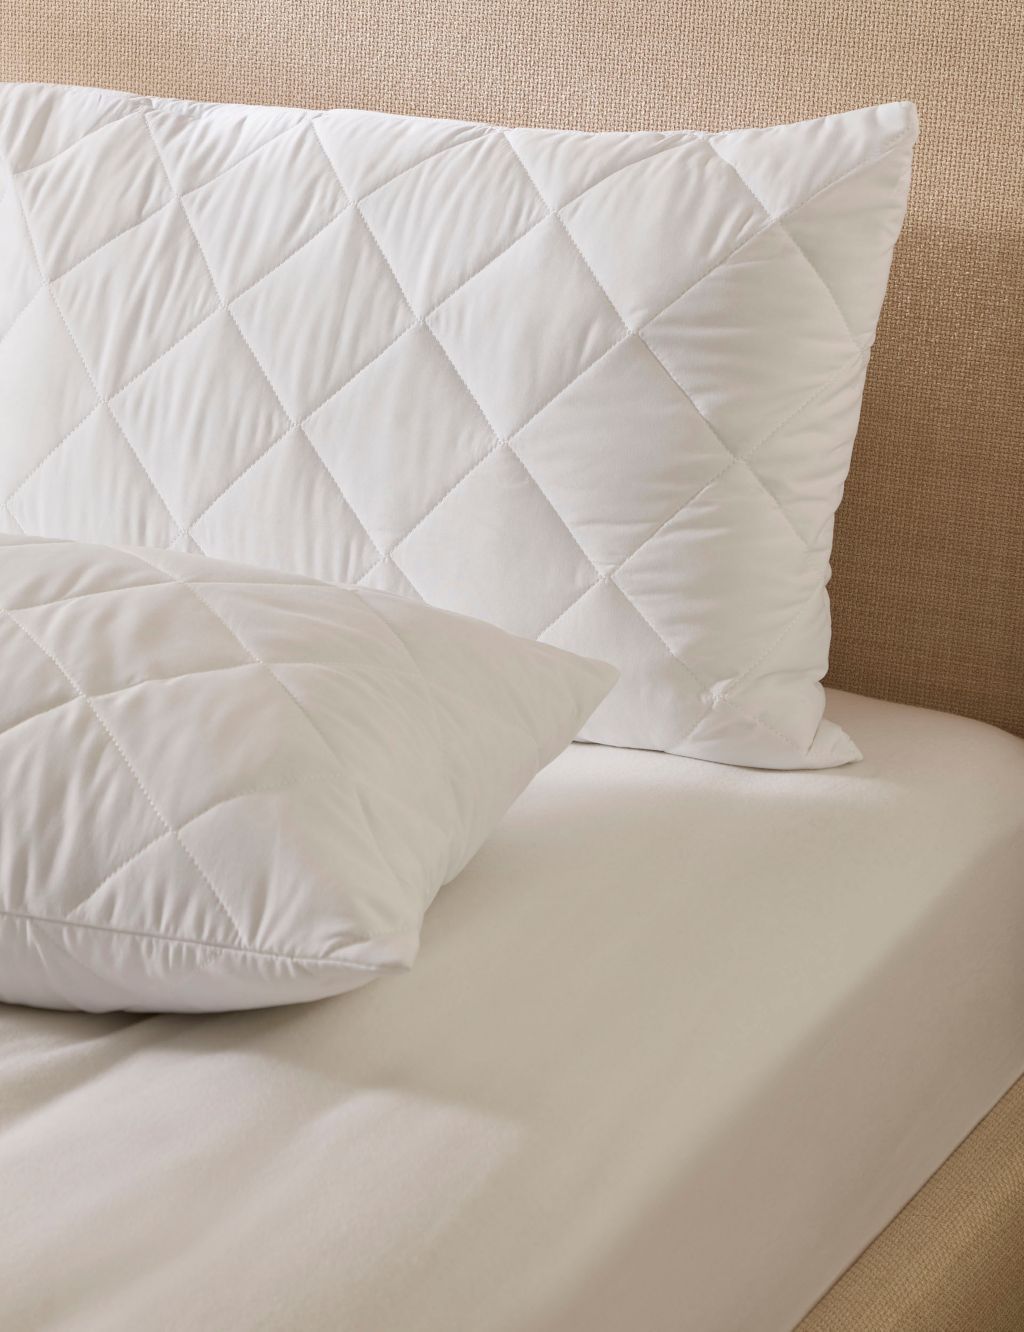 Simply Protect Pillow Protector